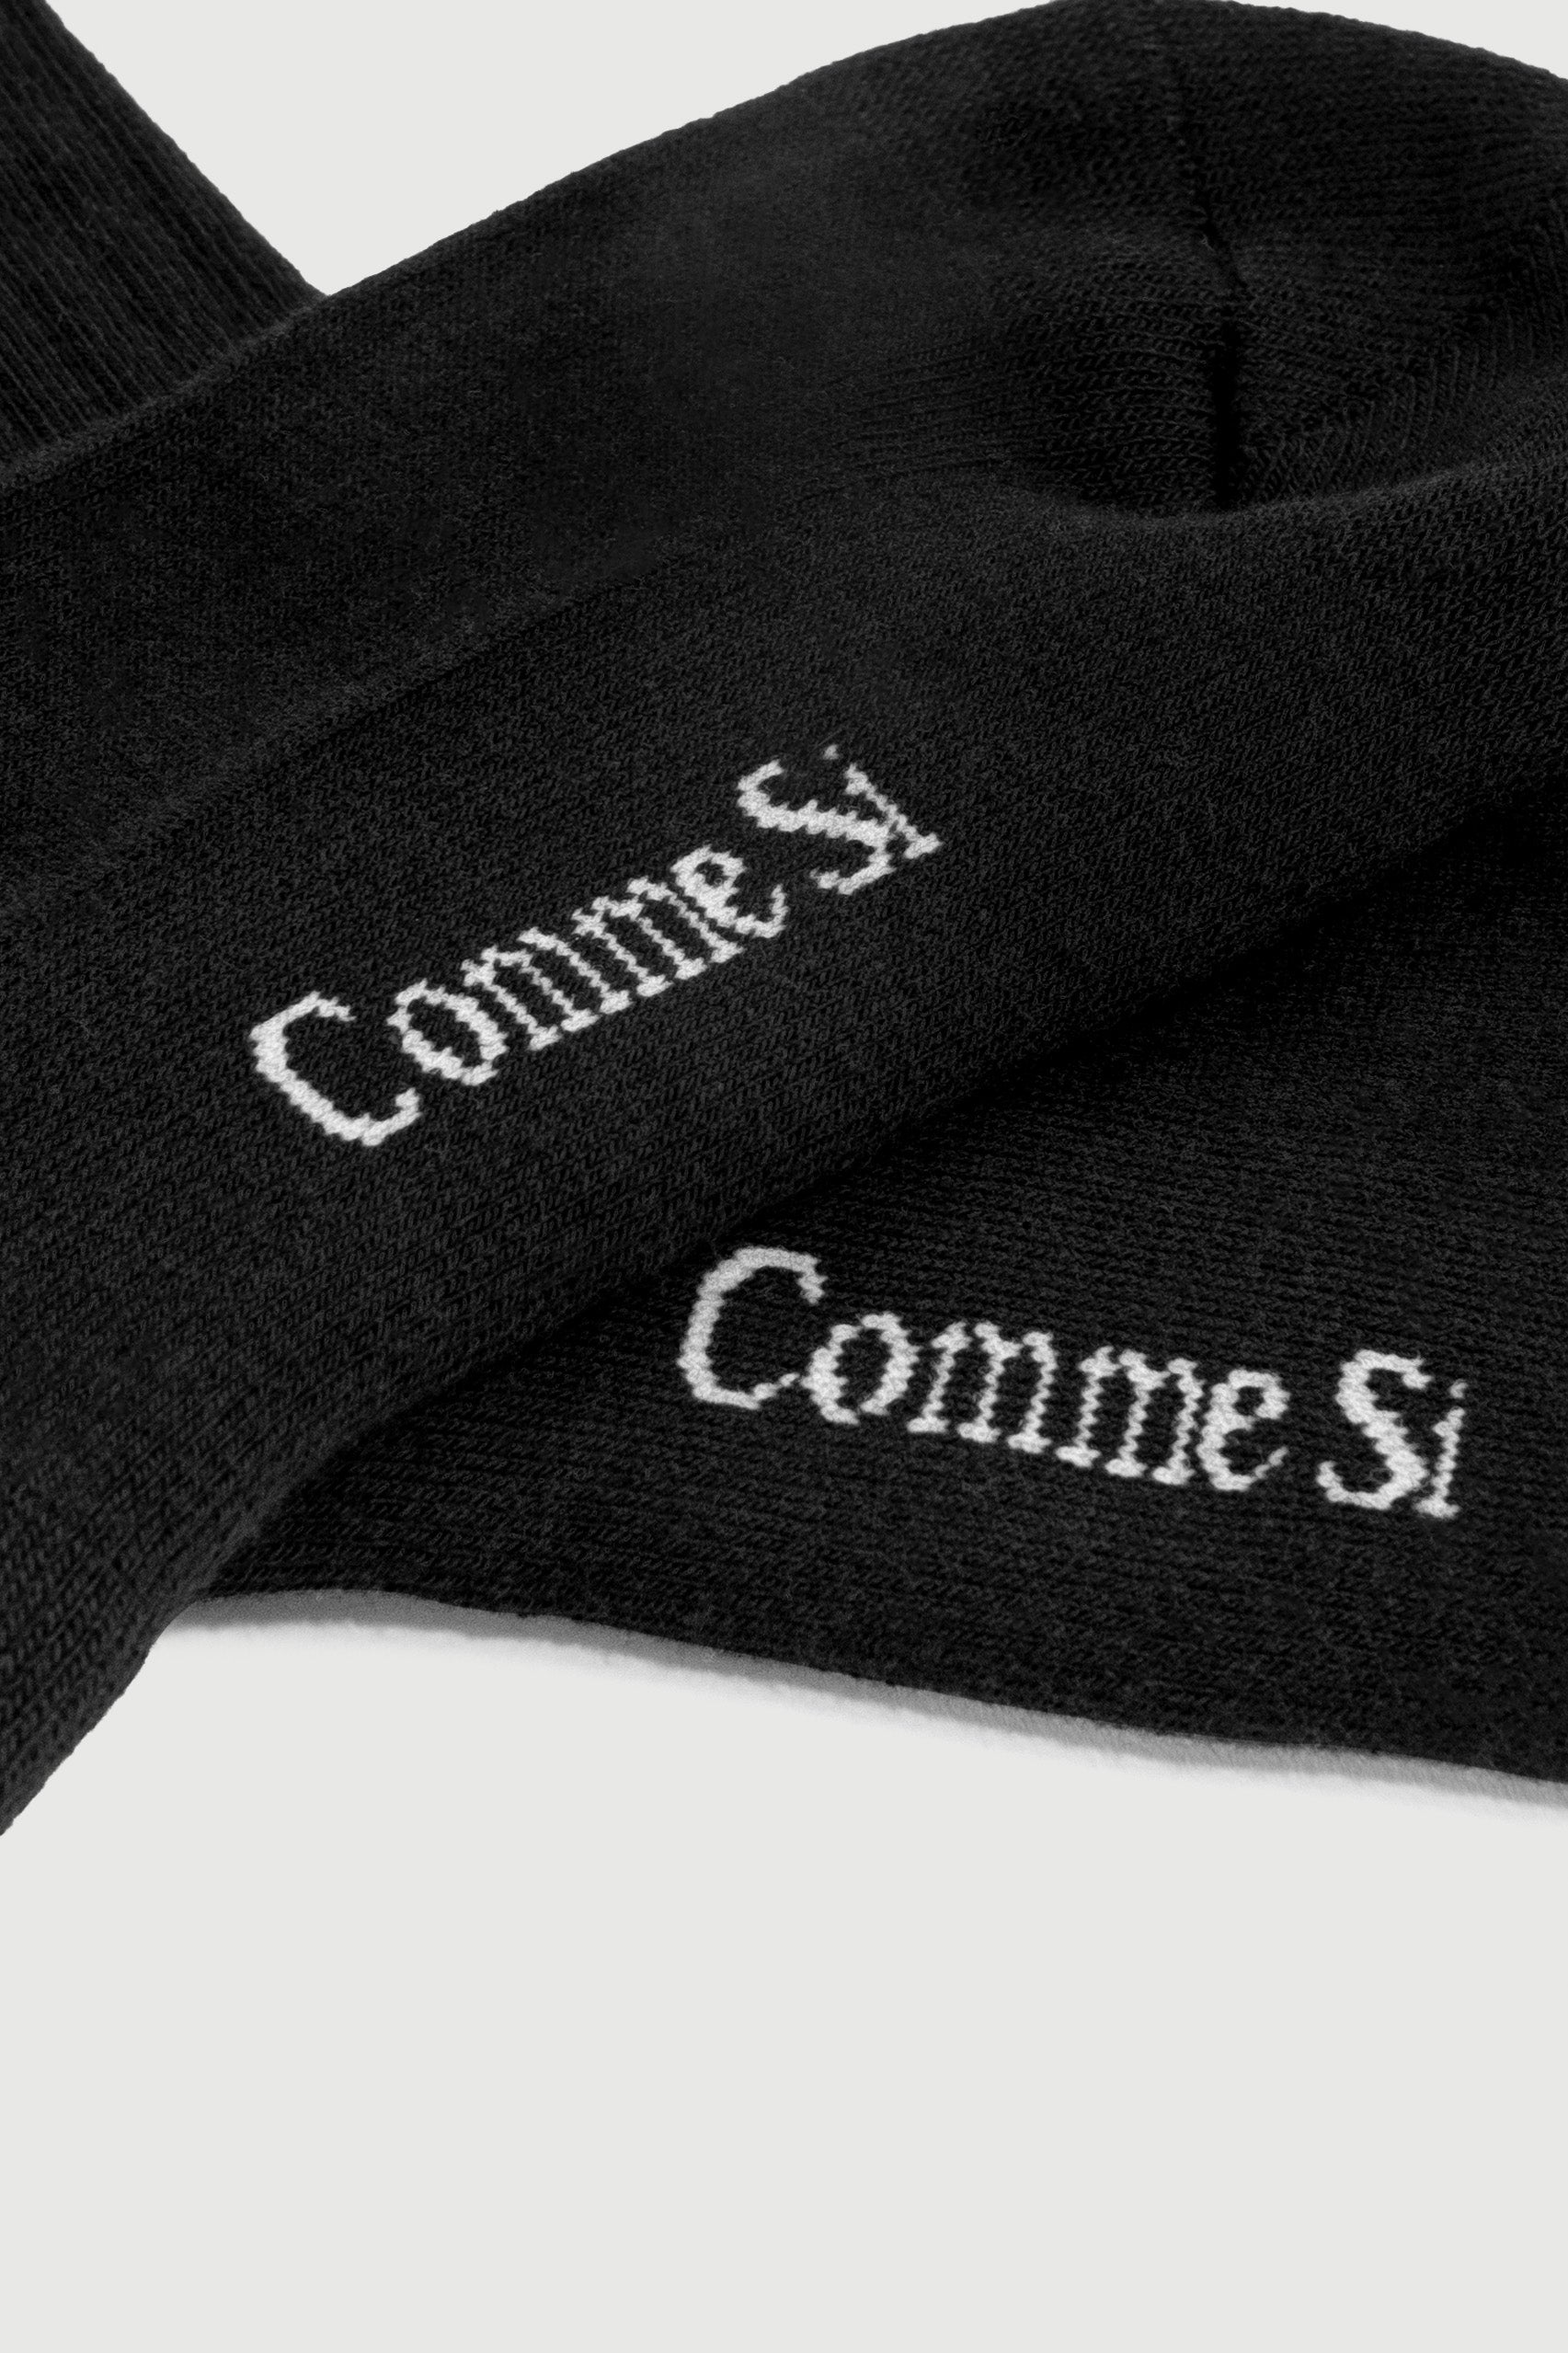 footbed detail of The Tube Sock, black, GOTS certified Organic Cotton, by Comme Si